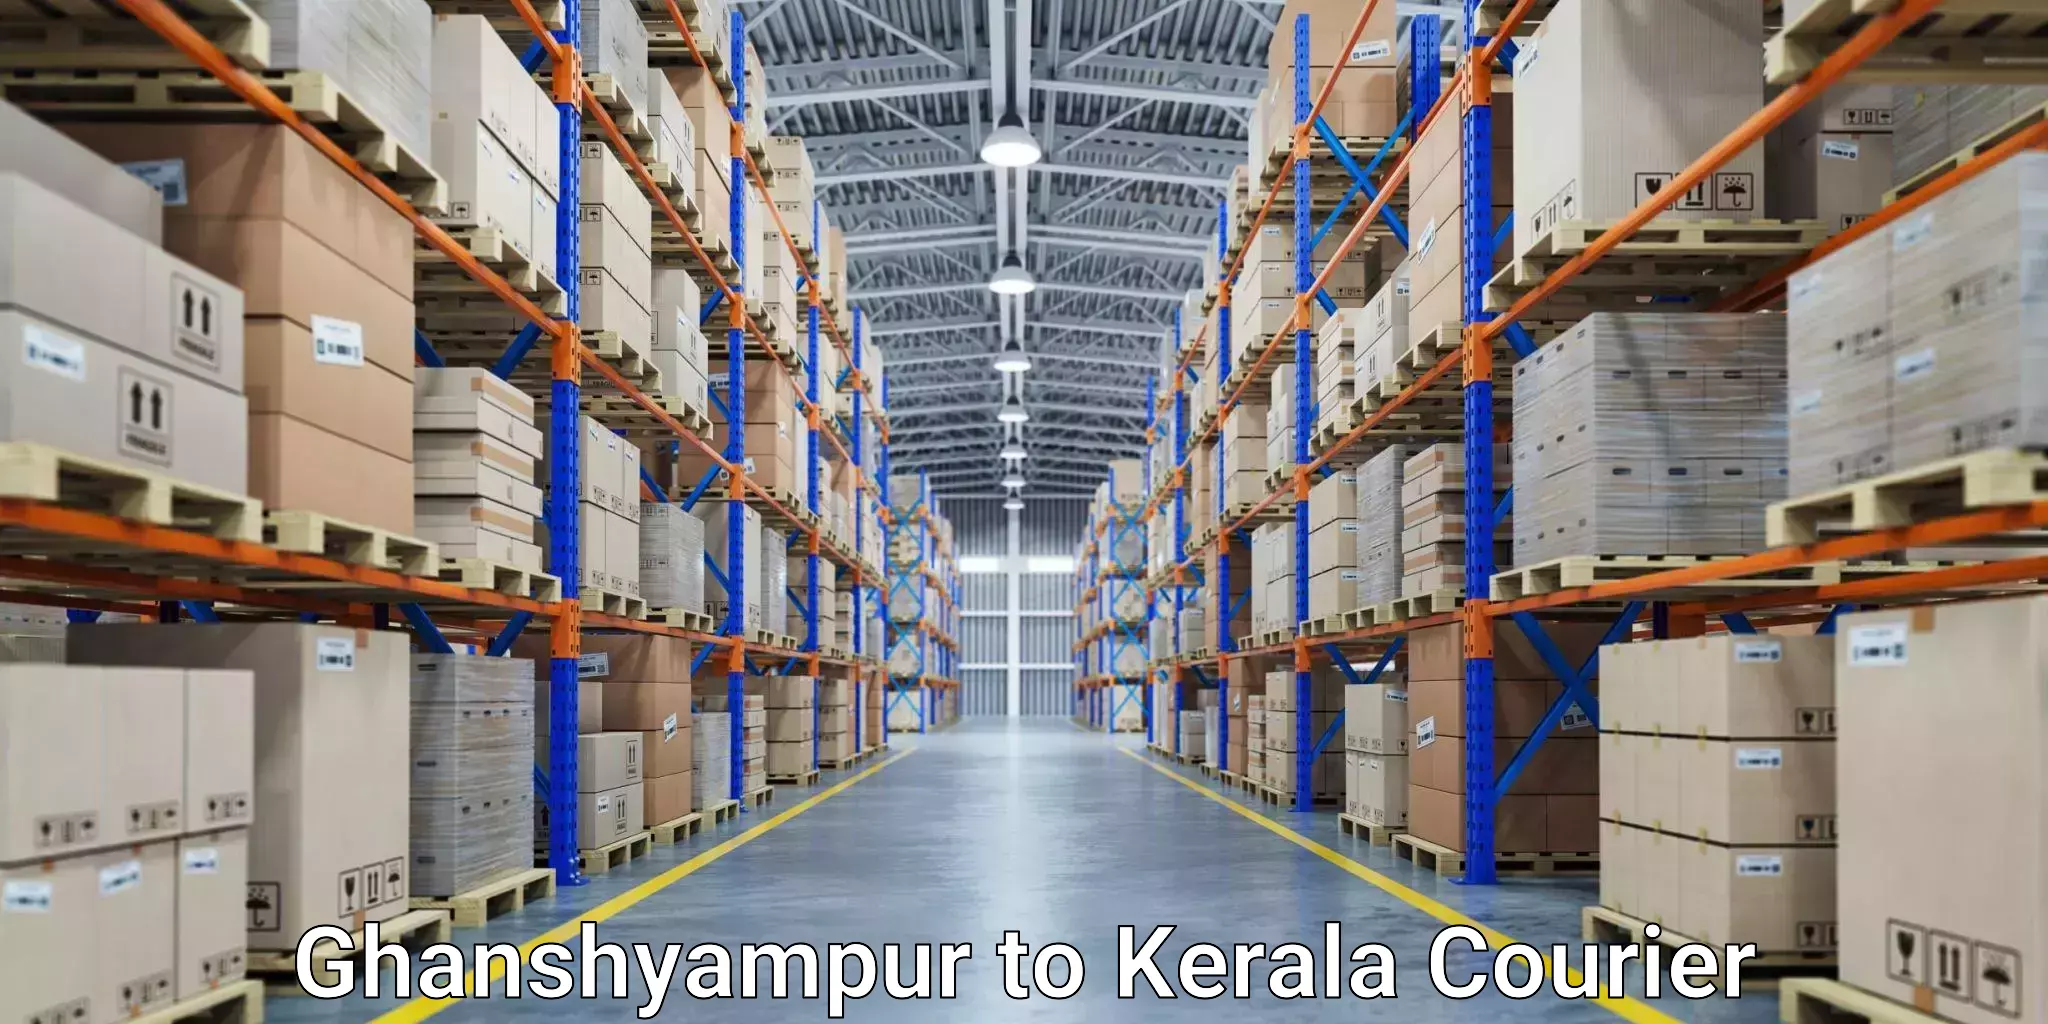 Round-the-clock parcel delivery Ghanshyampur to Kalpetta